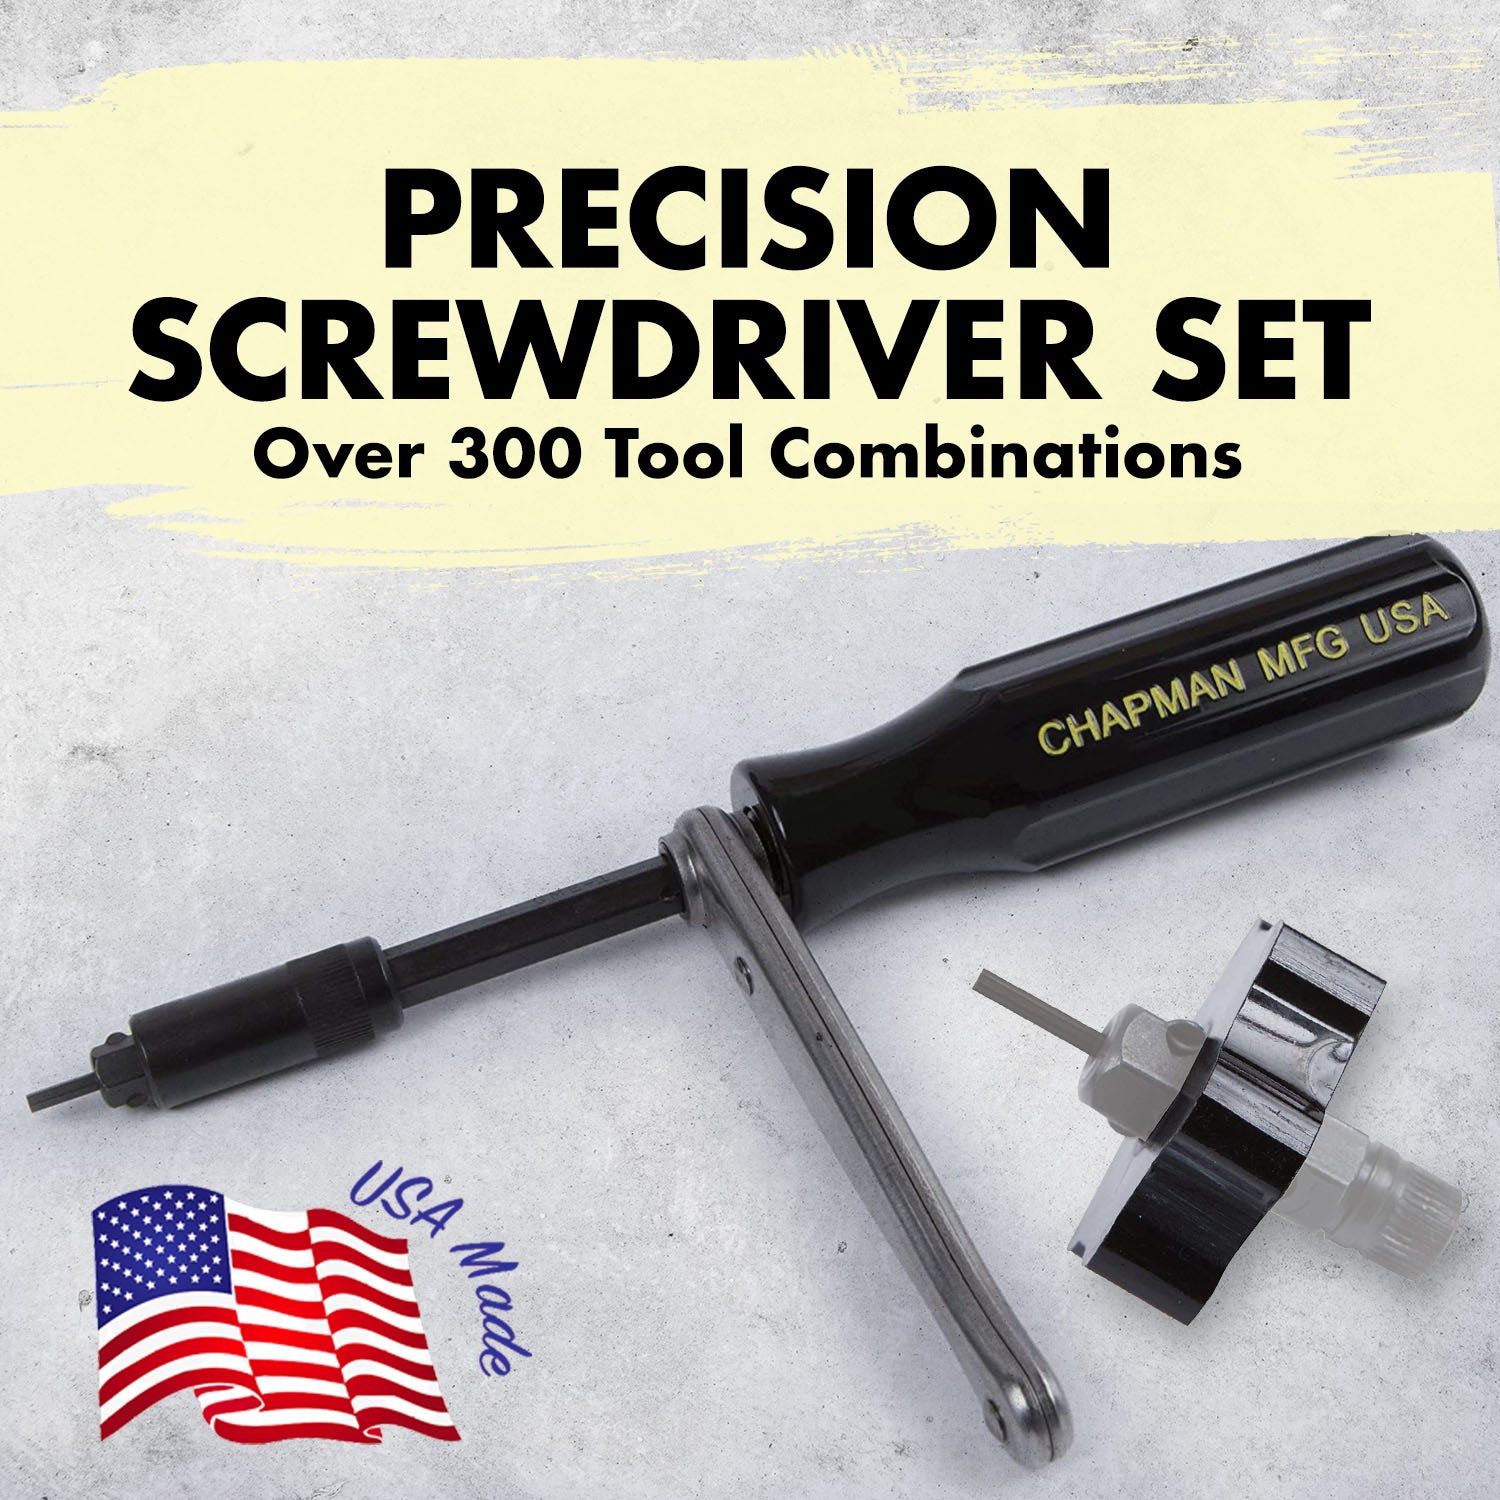 Precision Screwdriver Set - Spinner Top included in set is great for tight spaces or starting screws  | Chapman MFG